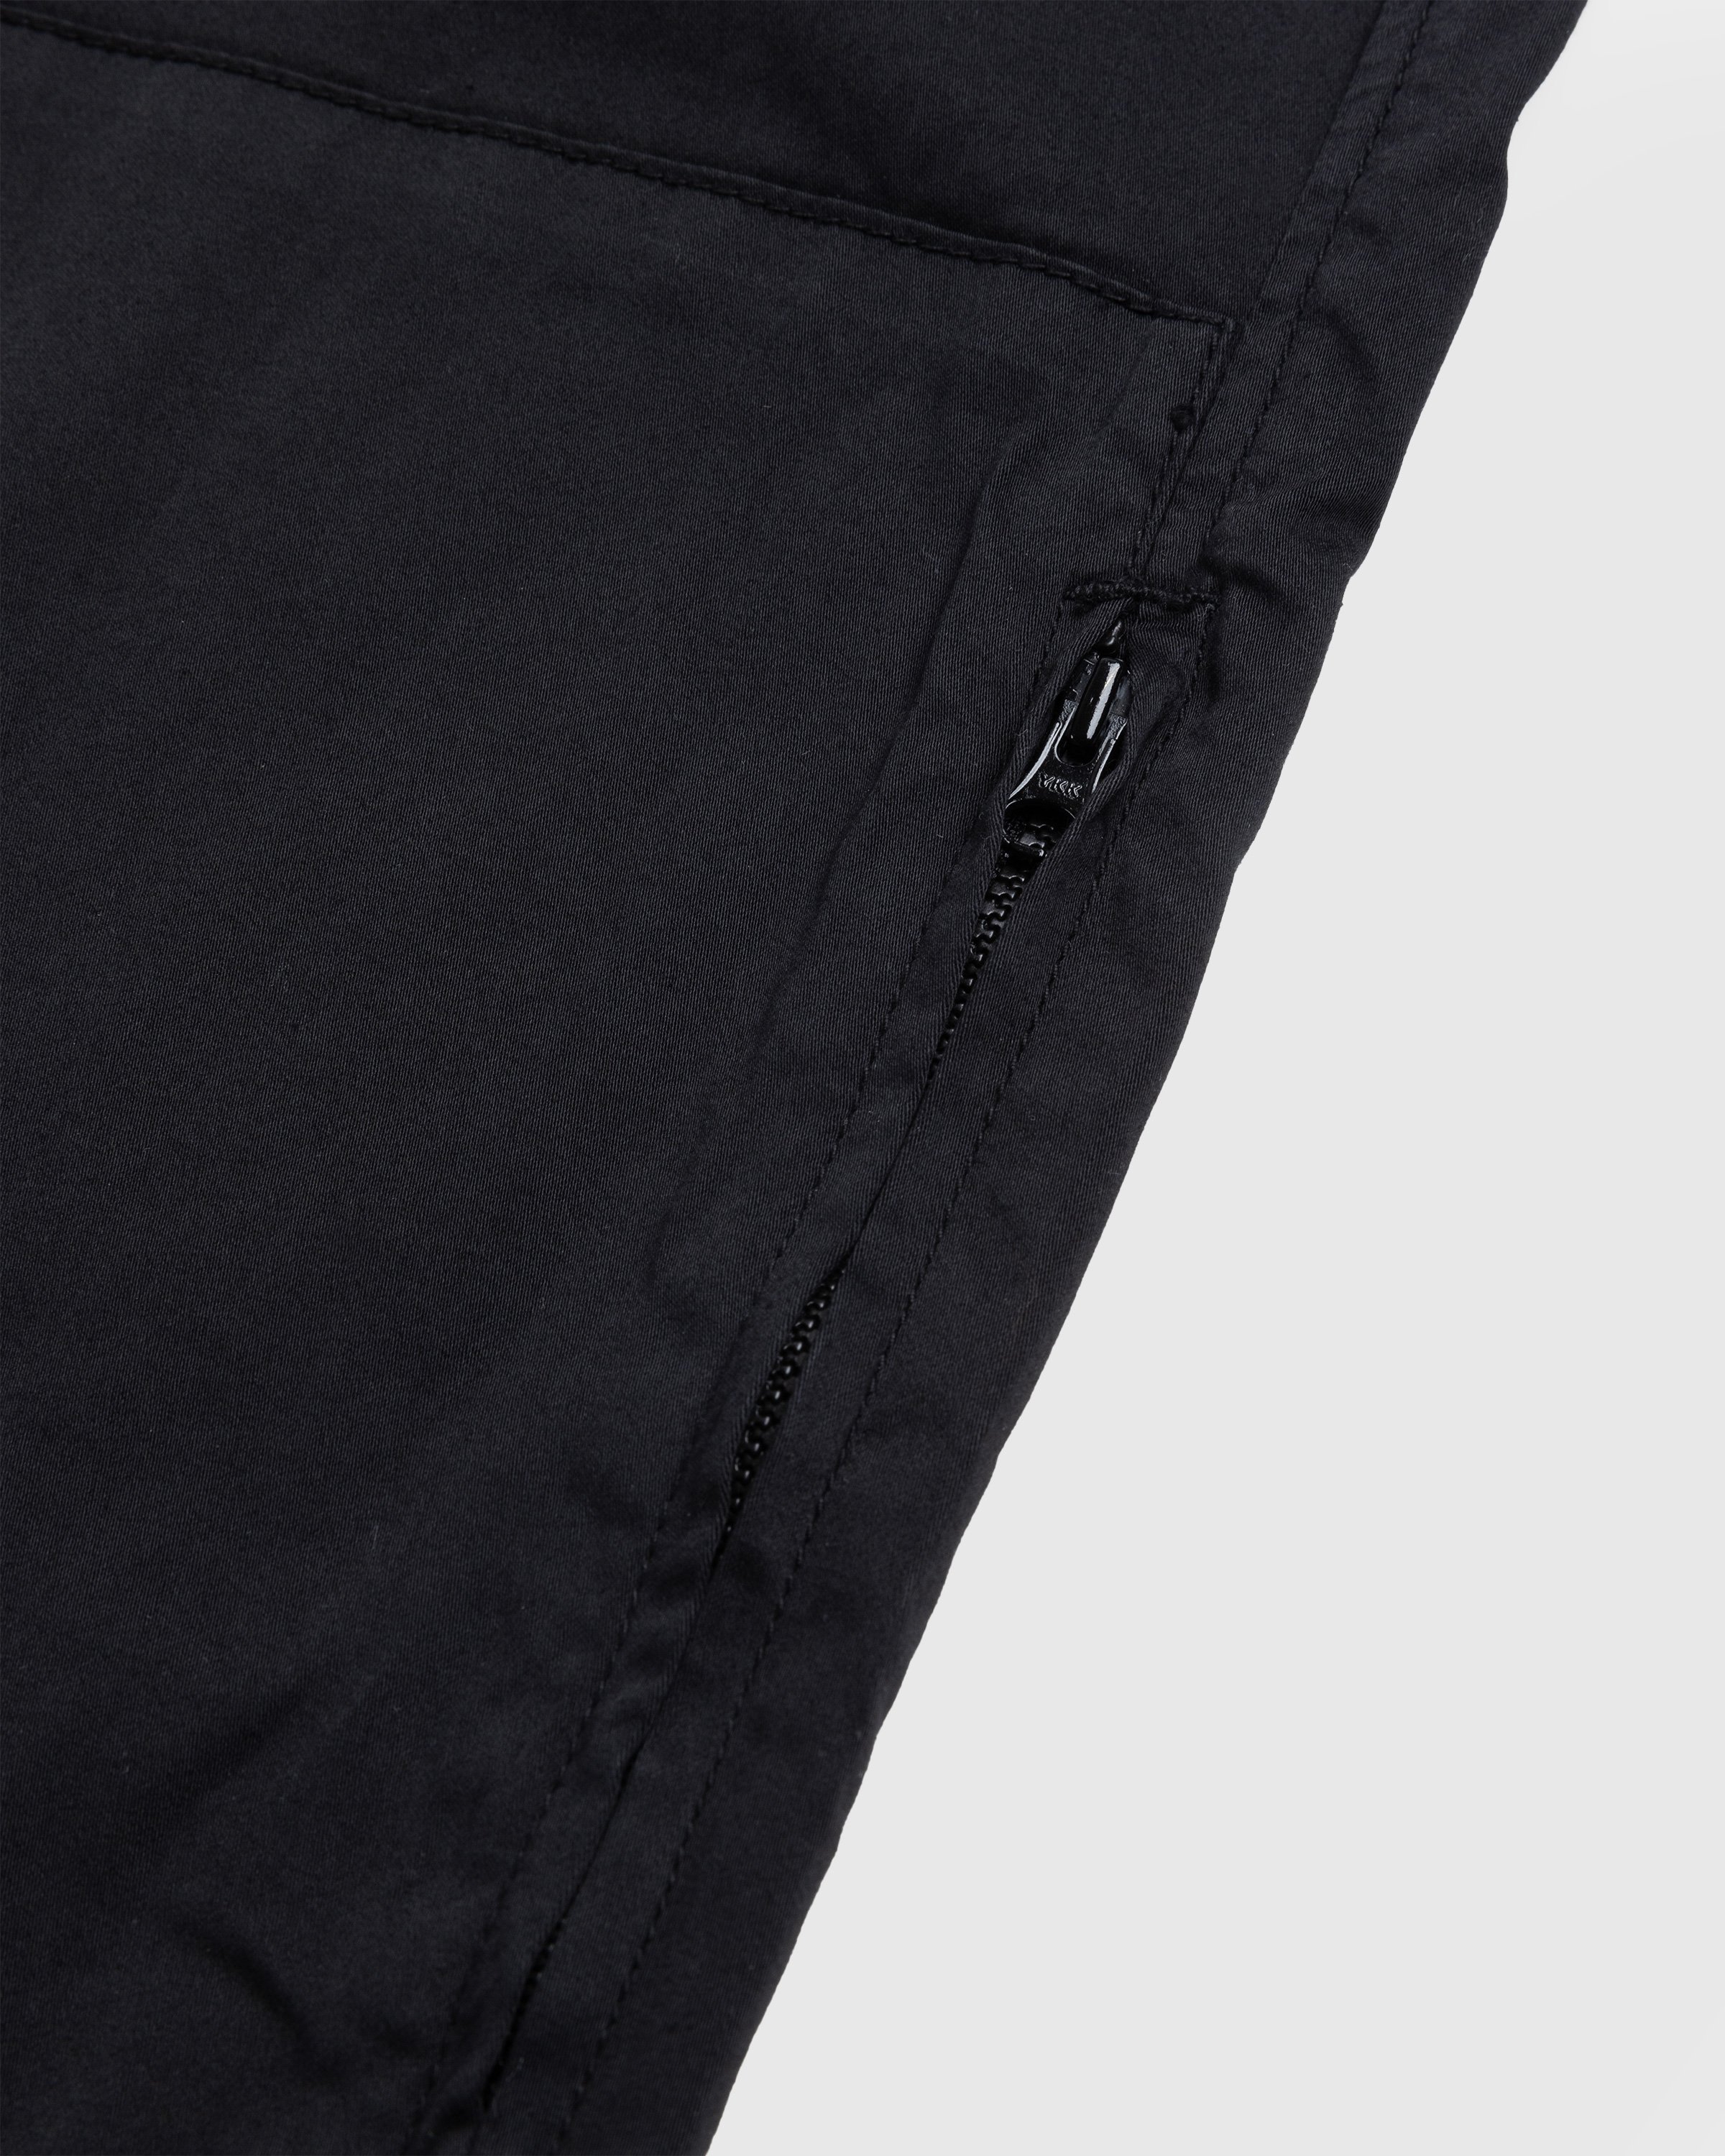 C.P. Company - Stretch Sateen Loose Fit Pants Black - Clothing - Black - Image 5